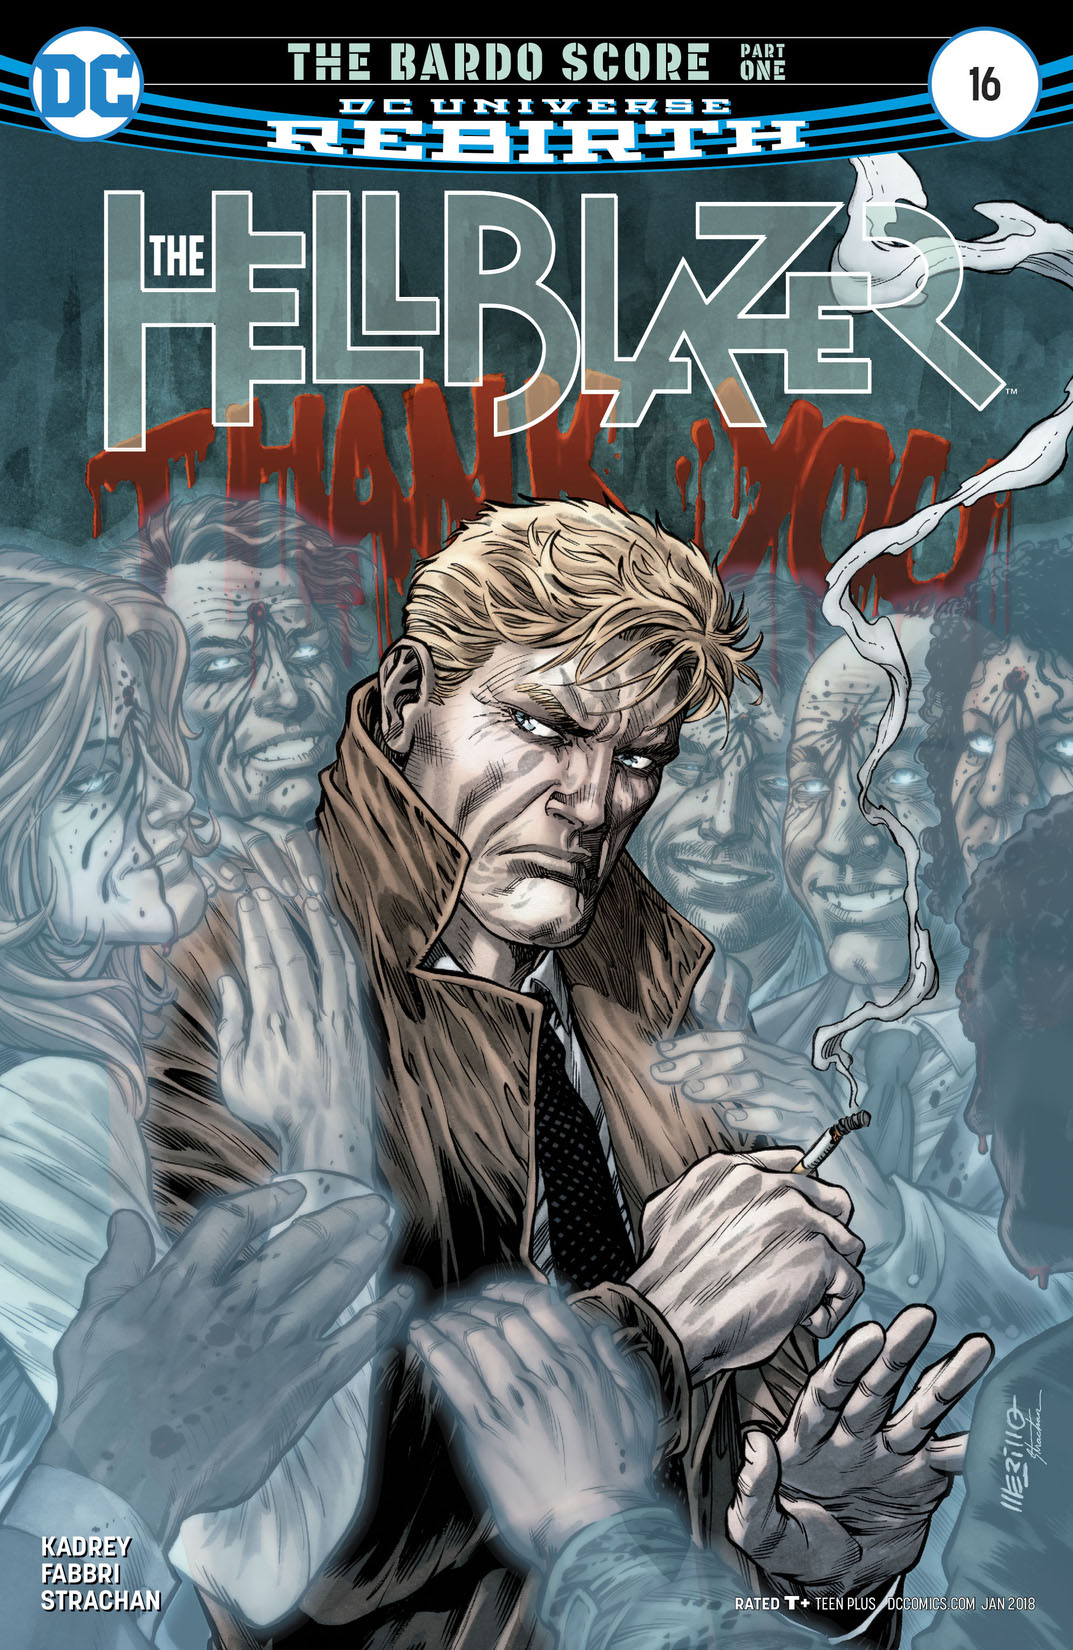 The Hellblazer #16 preview images